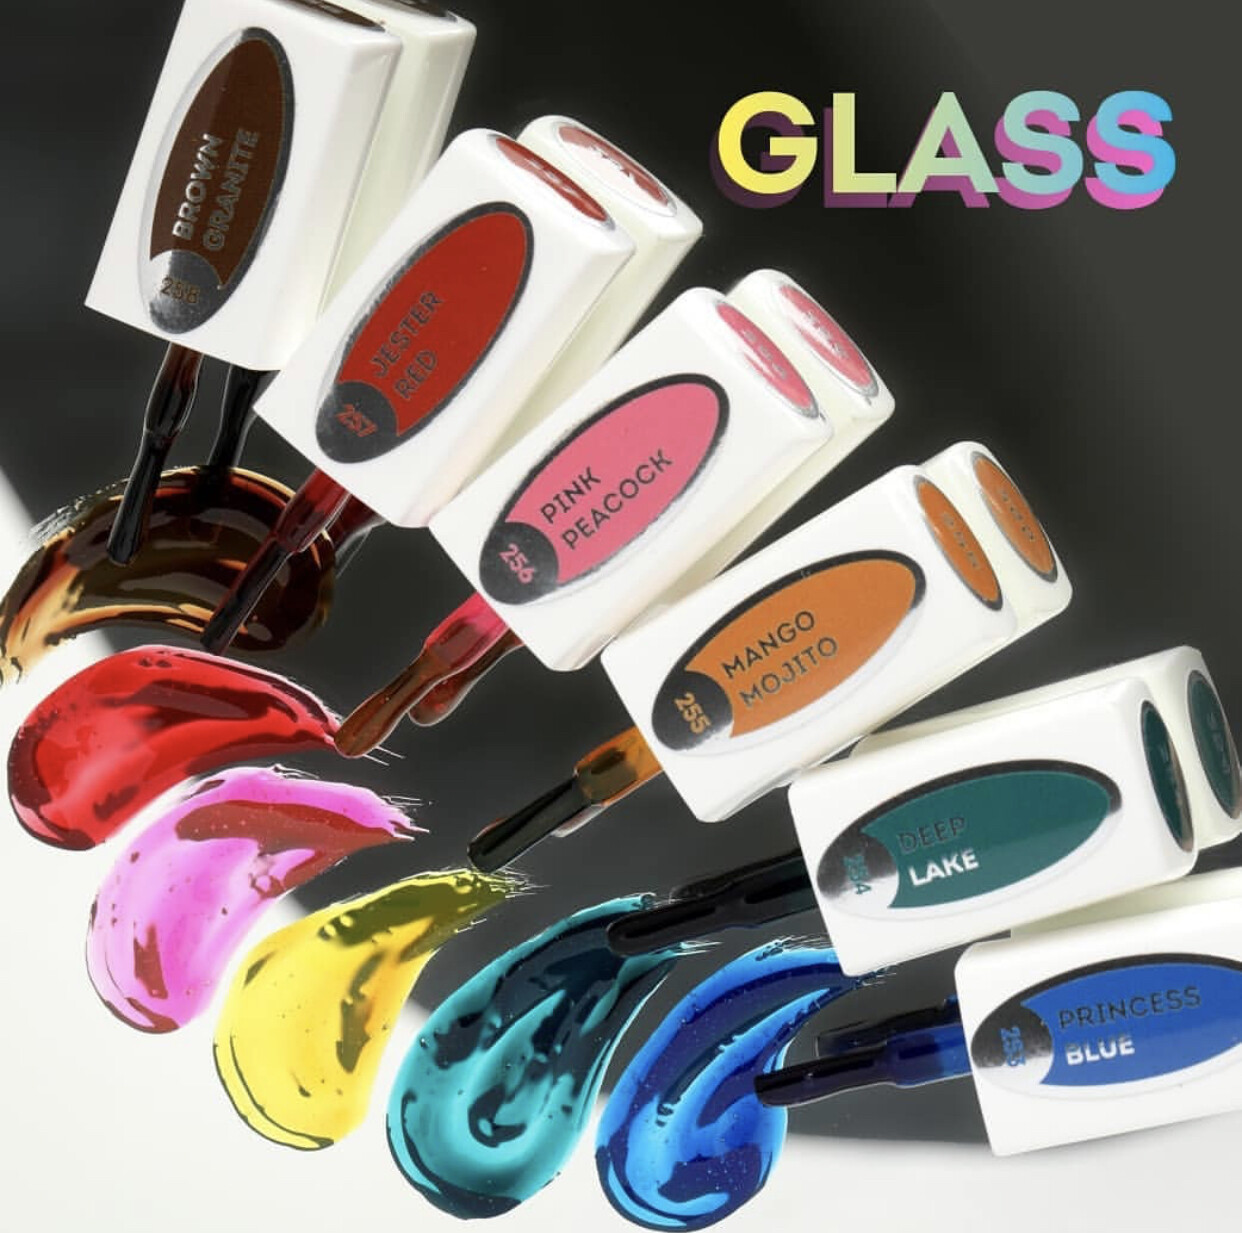 E.MiLac GLASS Set of 6 and FREE 5D Charmicon nailart sticker!